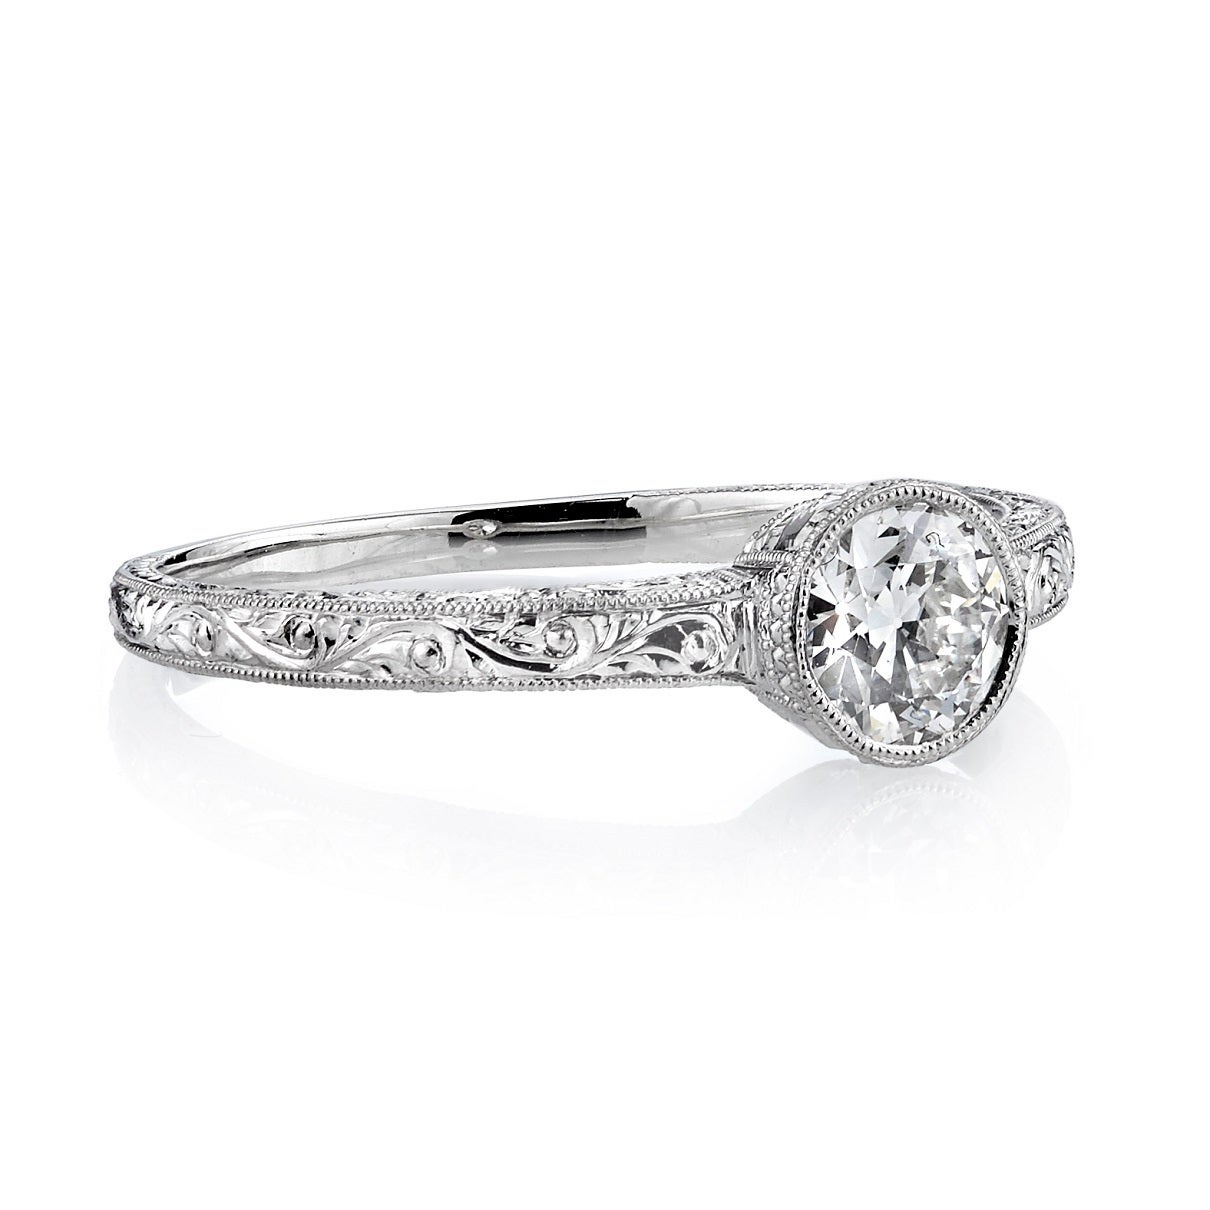 0.45ct G/VS2 GIA certified old European cut diamond set in a handcrafted platinum mounting. A sweet bezel set engagement ring featuring an engraved band.